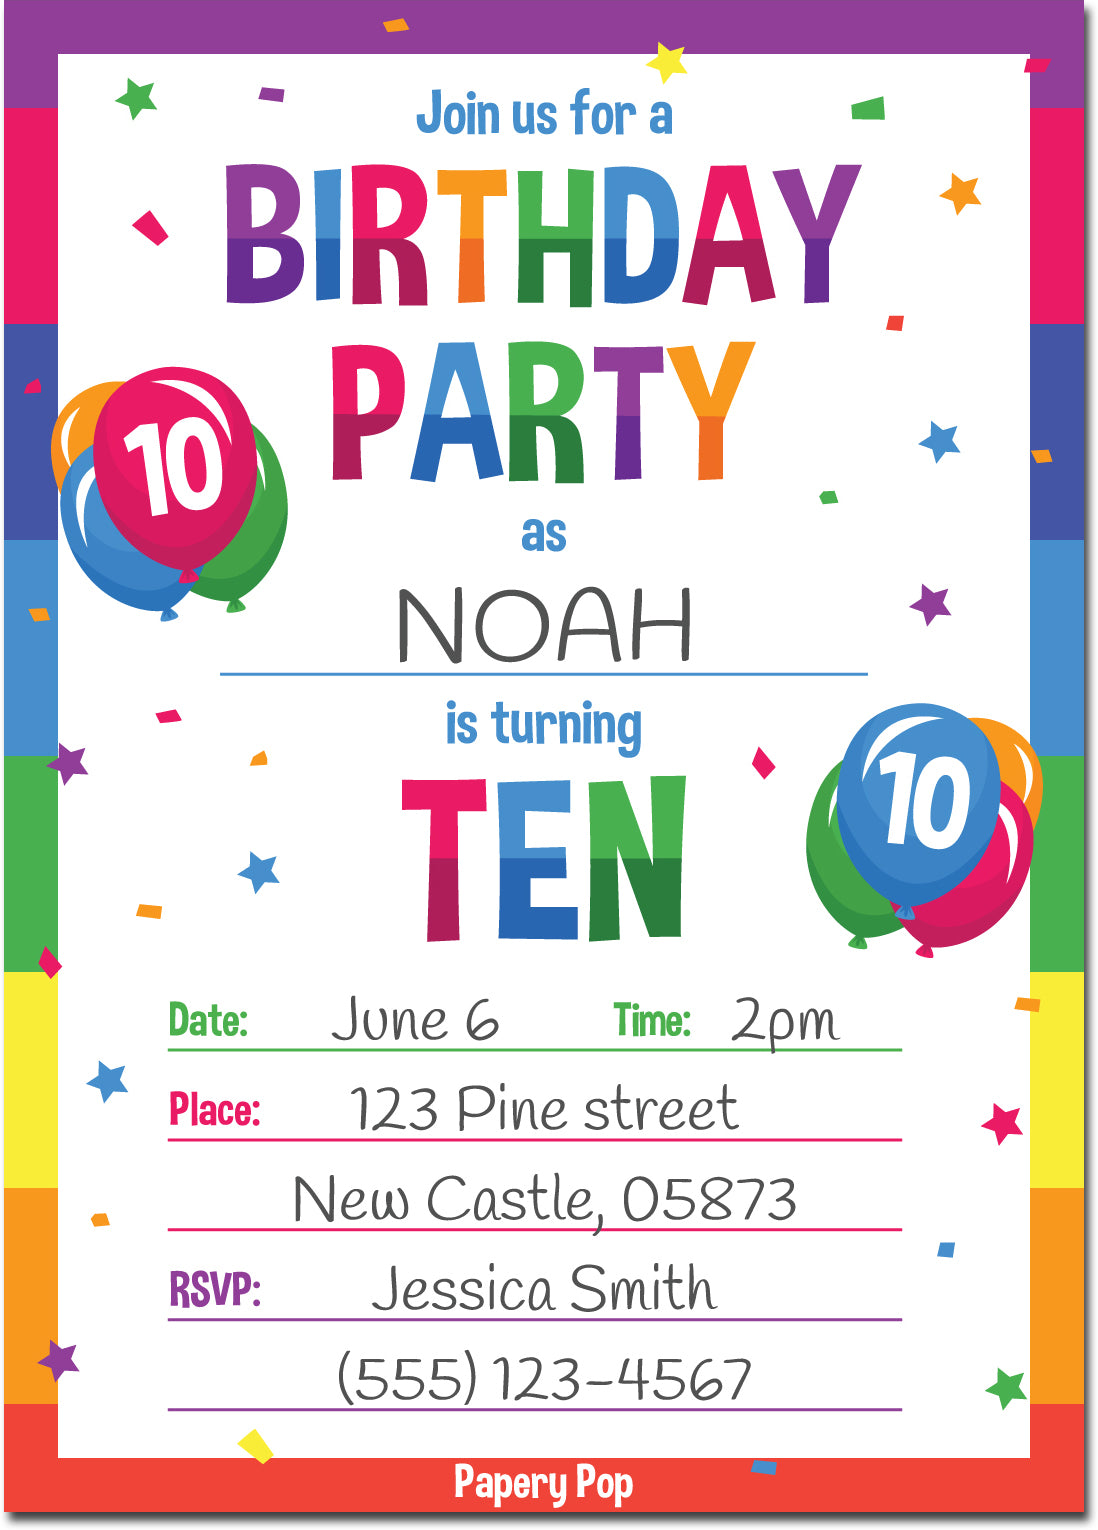 10-year-old-birthday-party-invitations-with-envelopes-15-count-kid